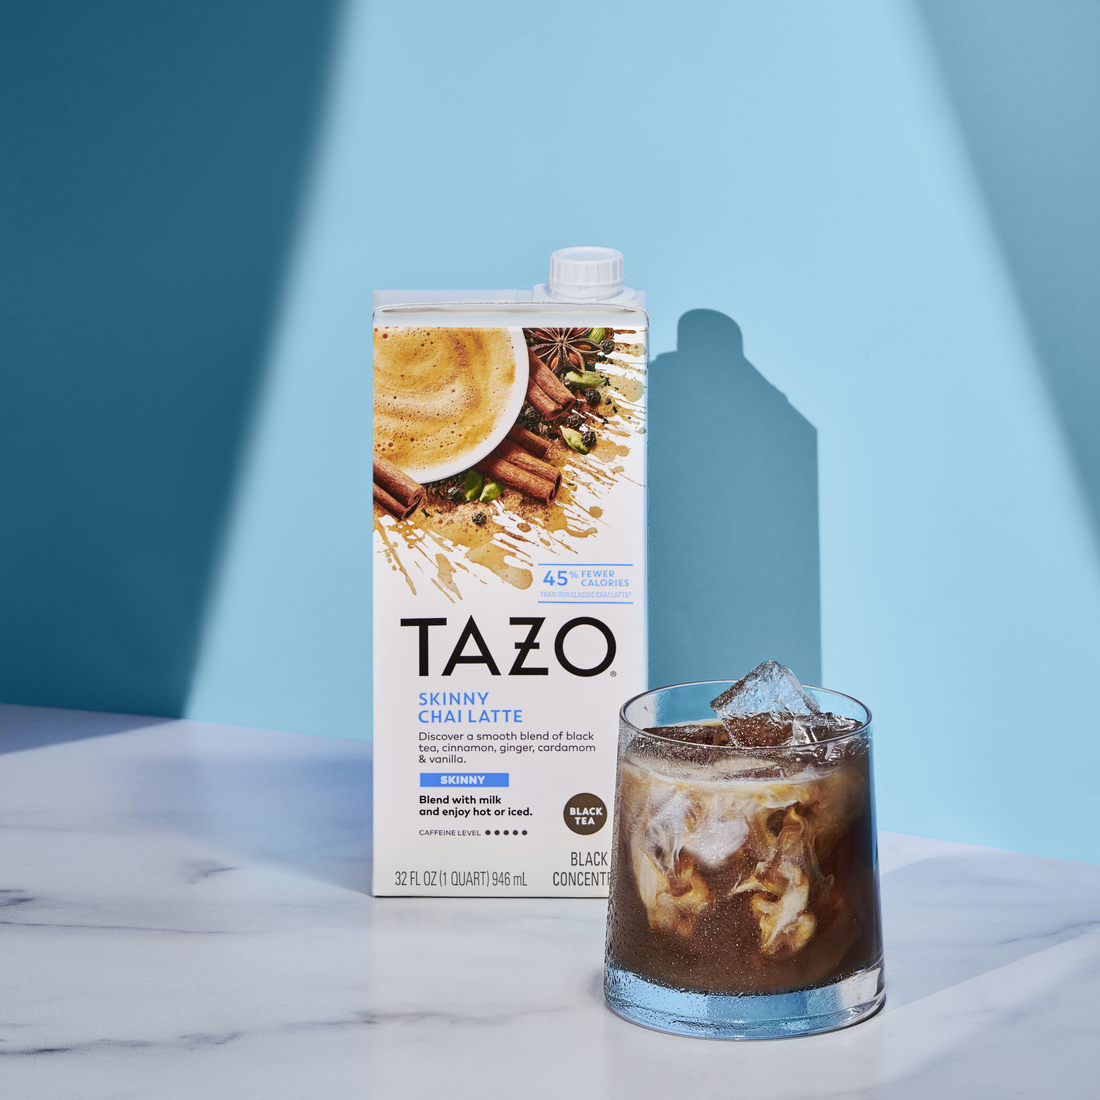 Tazo SkinnyChaiLatteTeaConcentrate image